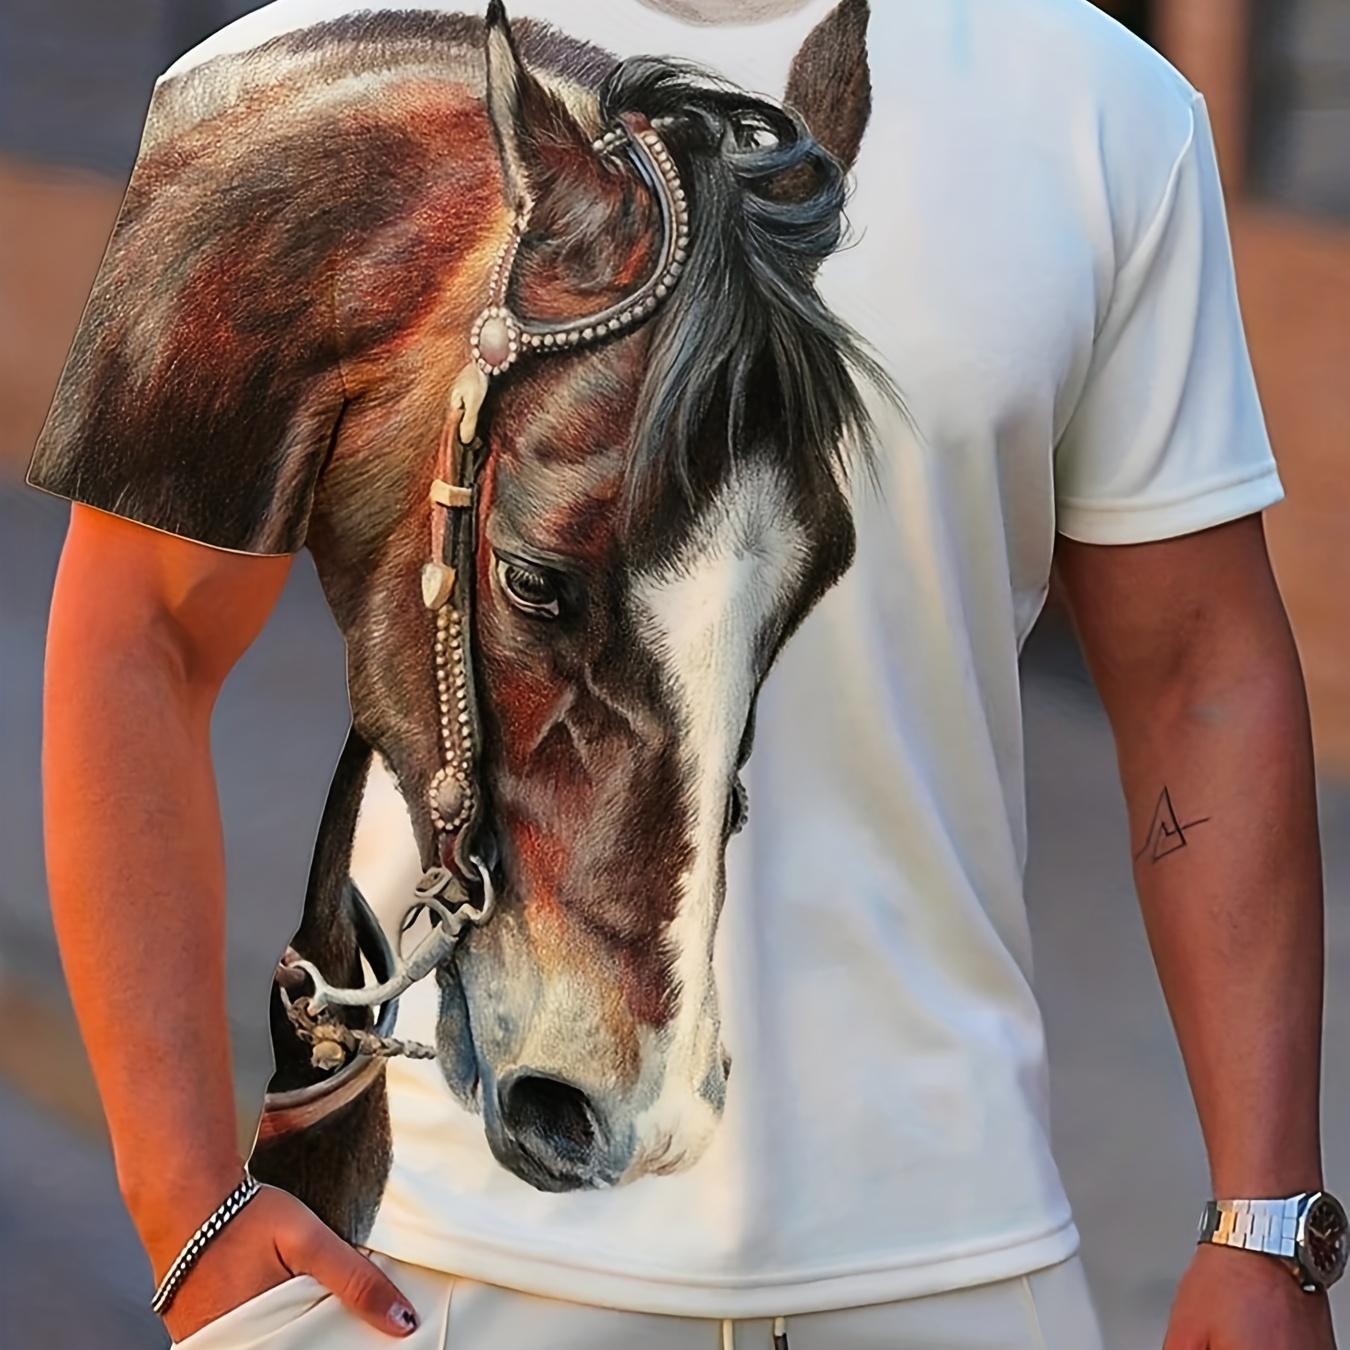 

Men's Horse Graphic T-shirt - 3d Digital Print, Active & Stretchy Short Sleeve Tee For Summer Outdoor Activities